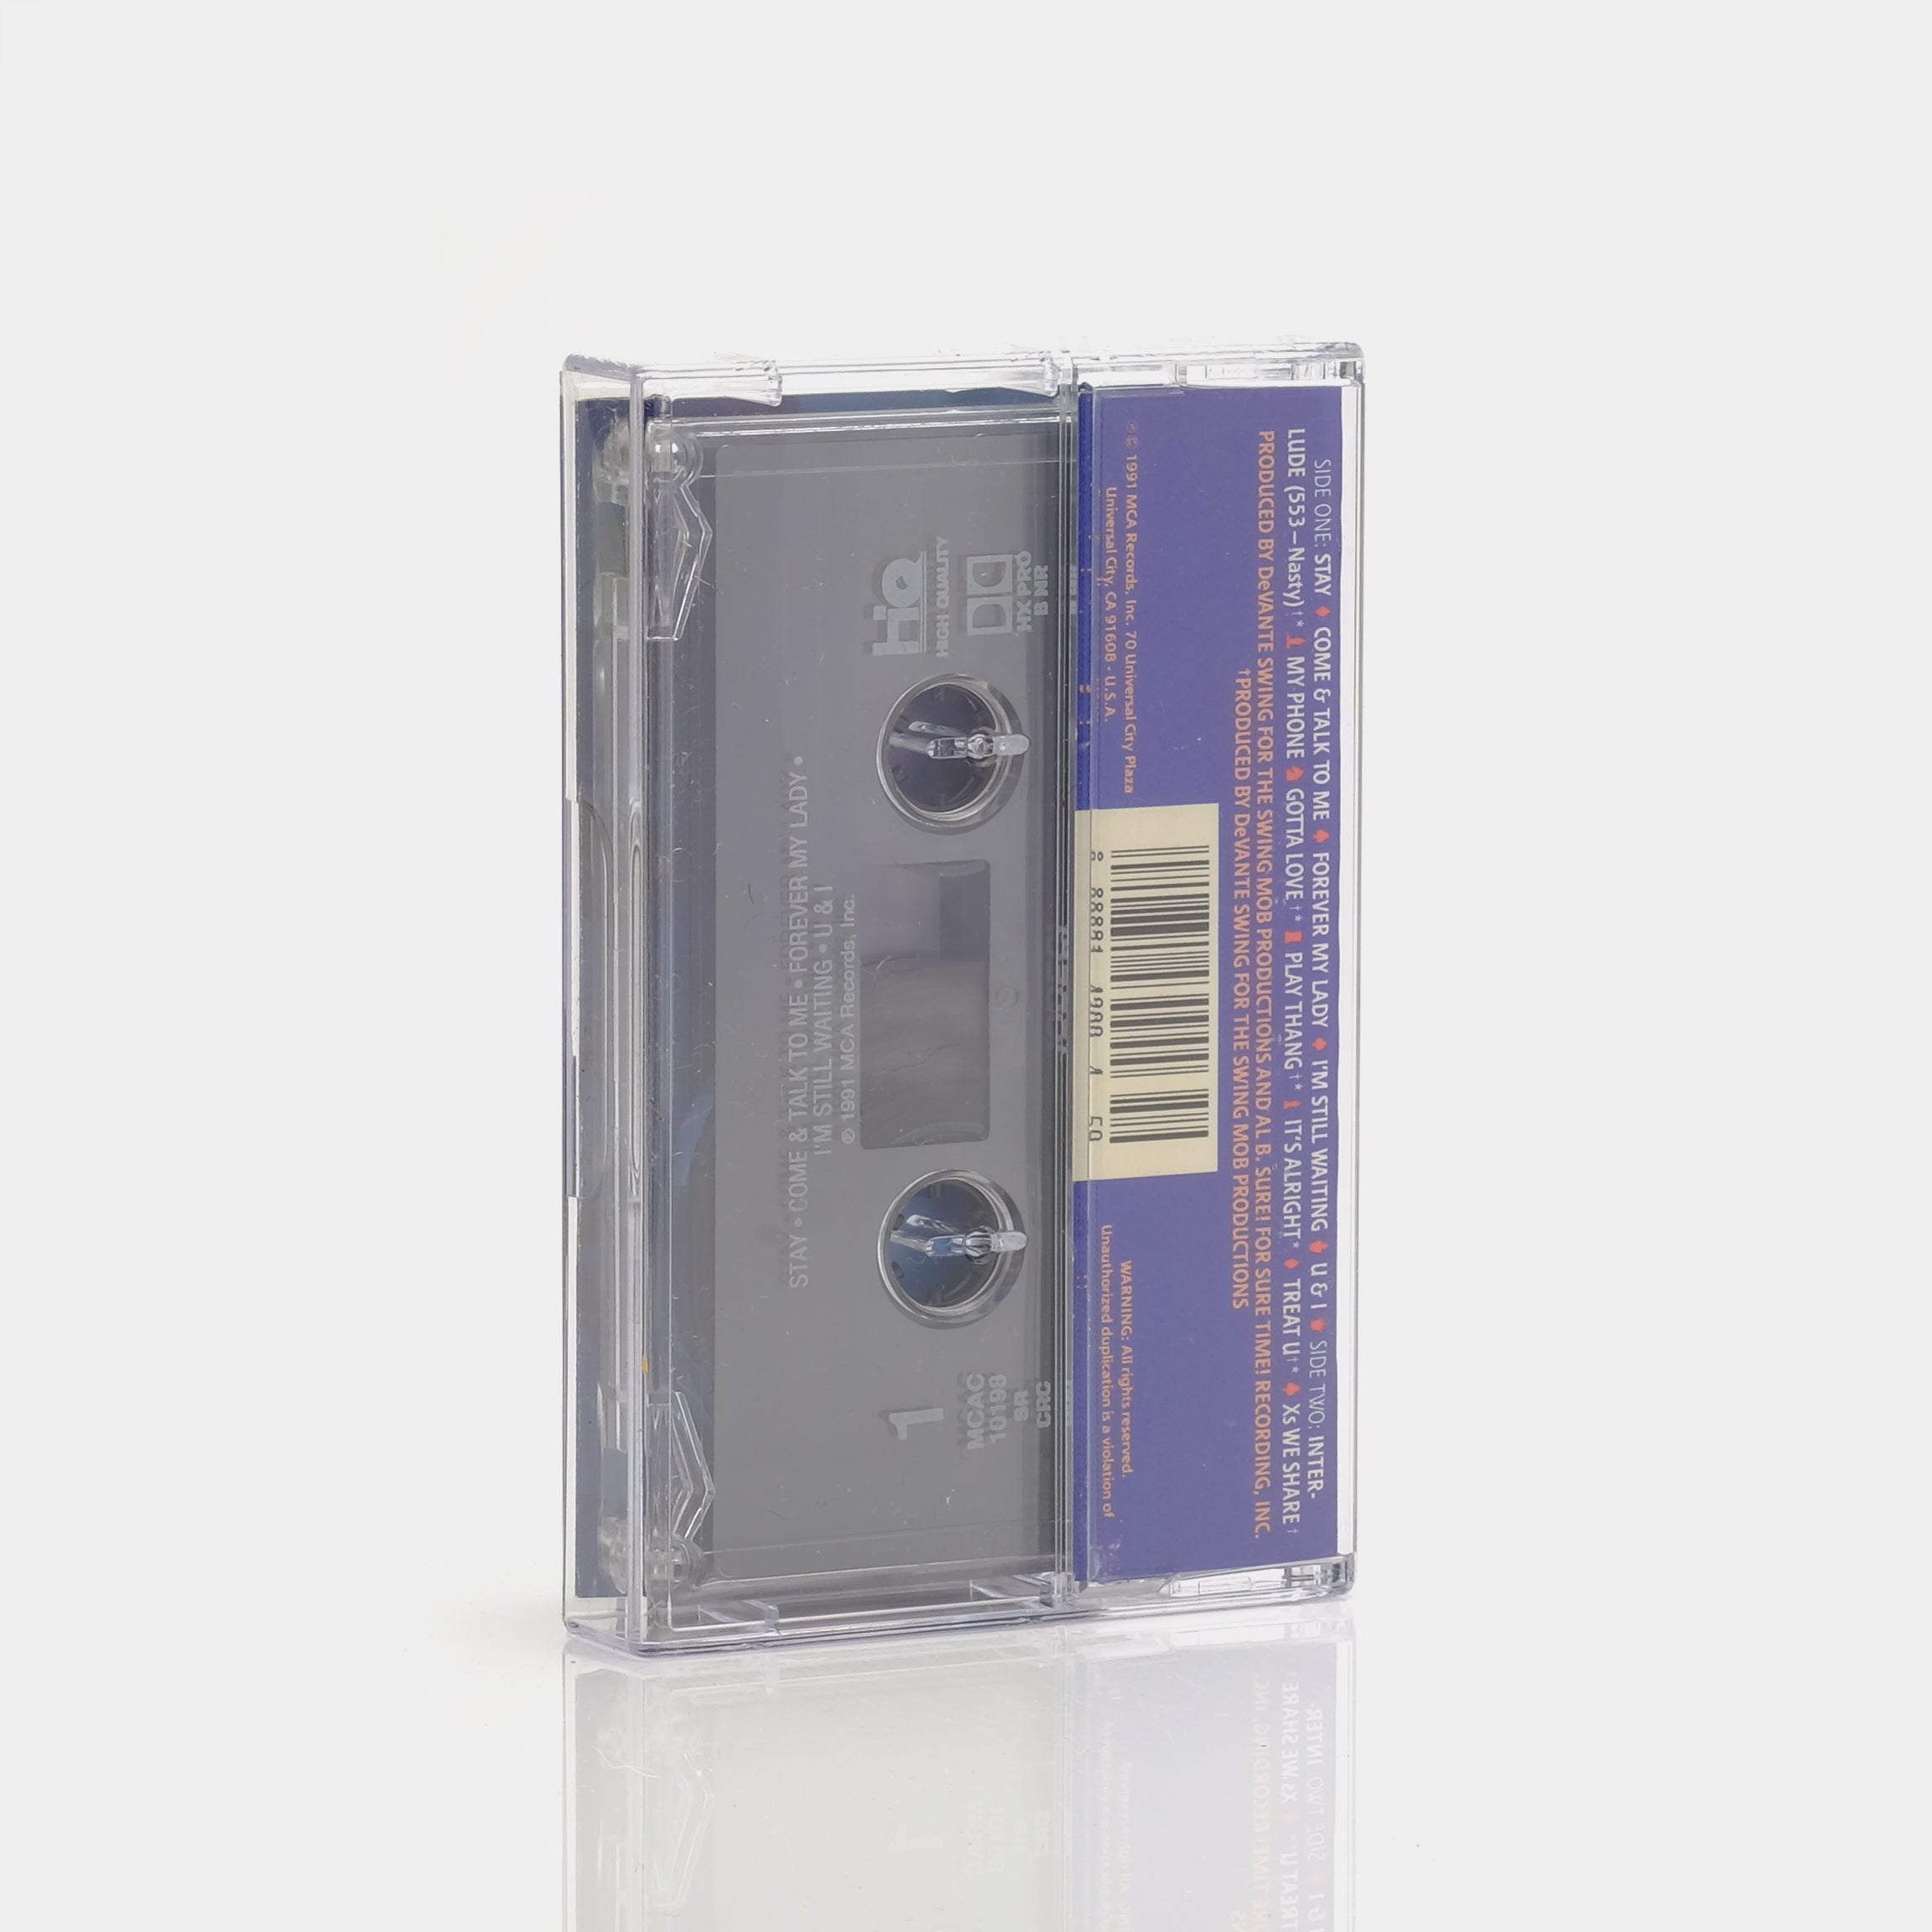 Jodeci - Forever My Lady Cassette Tape